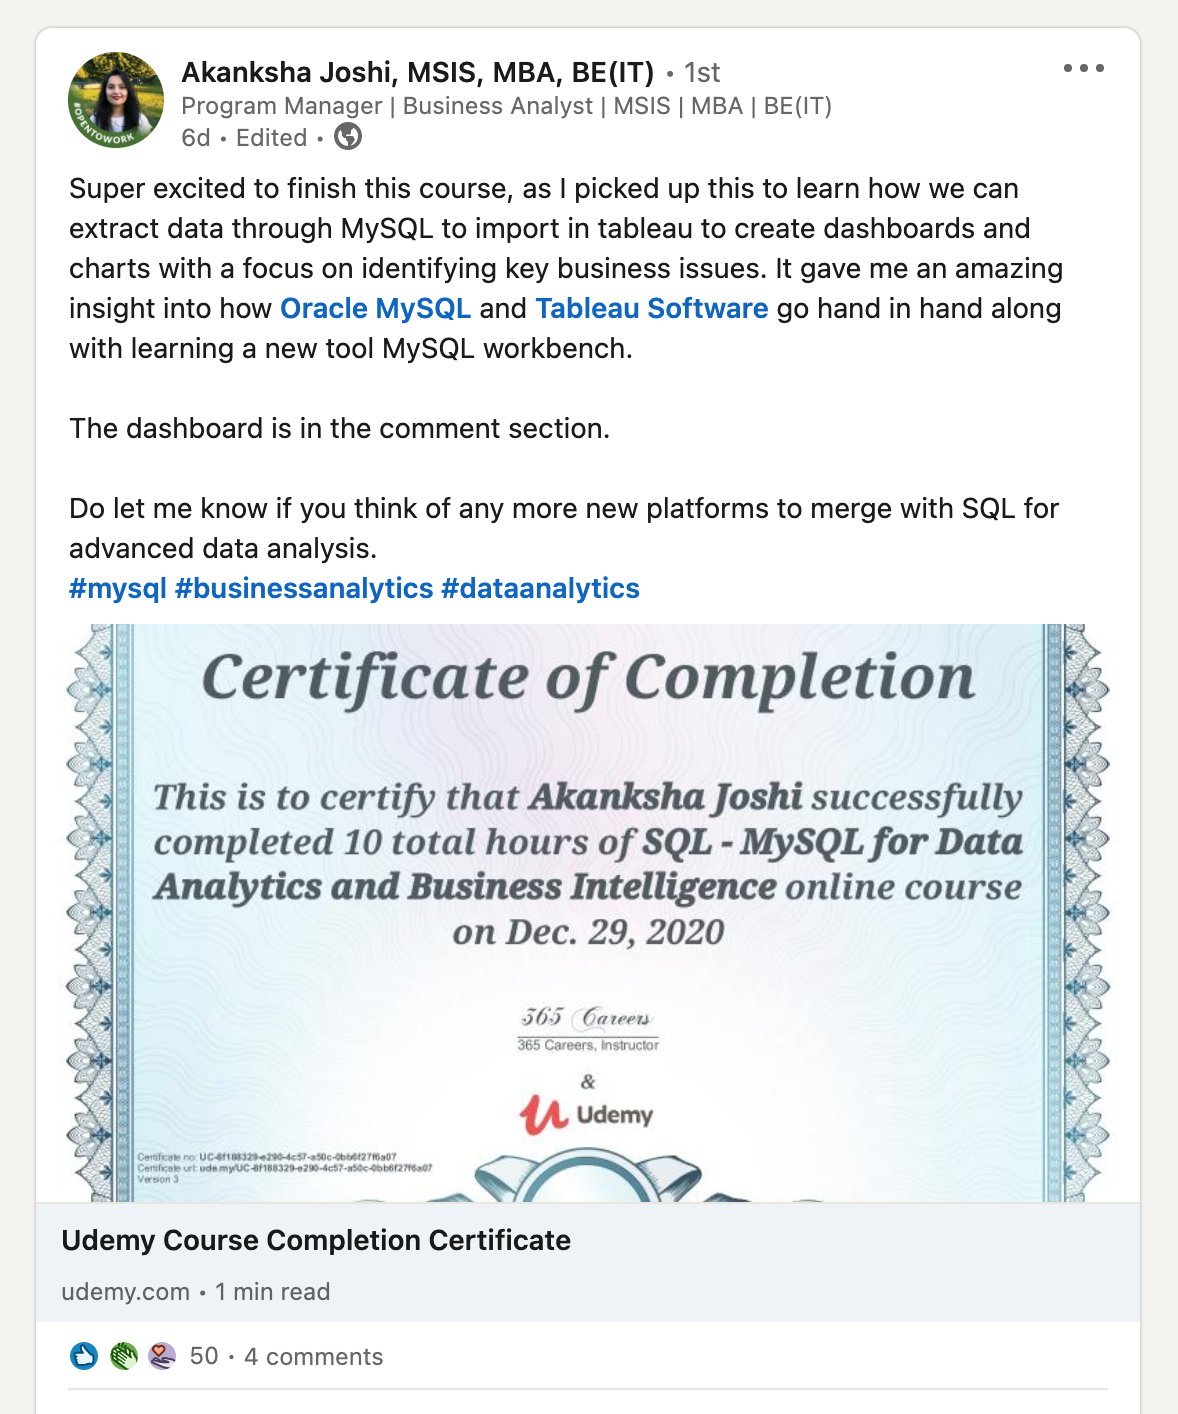 Udemy Certificate of Completion for Akanksha Joshi in the "SQL-MySQL for Data Analytics and Business Intelligence" course